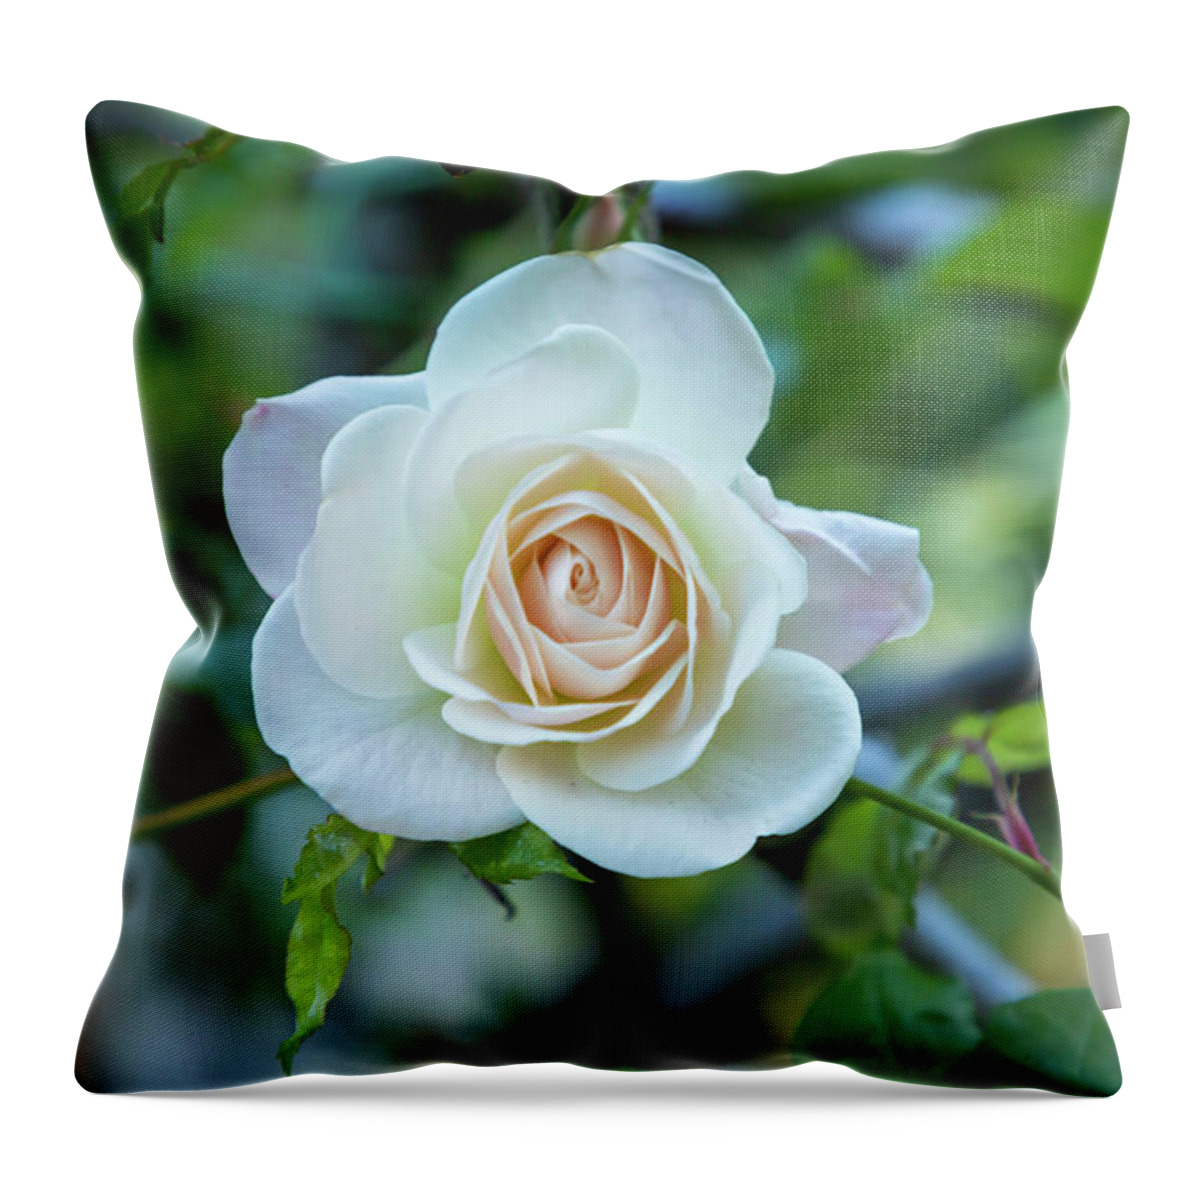 Rose Throw Pillow featuring the photograph Delicate White Spring Rose by Bonnie Follett